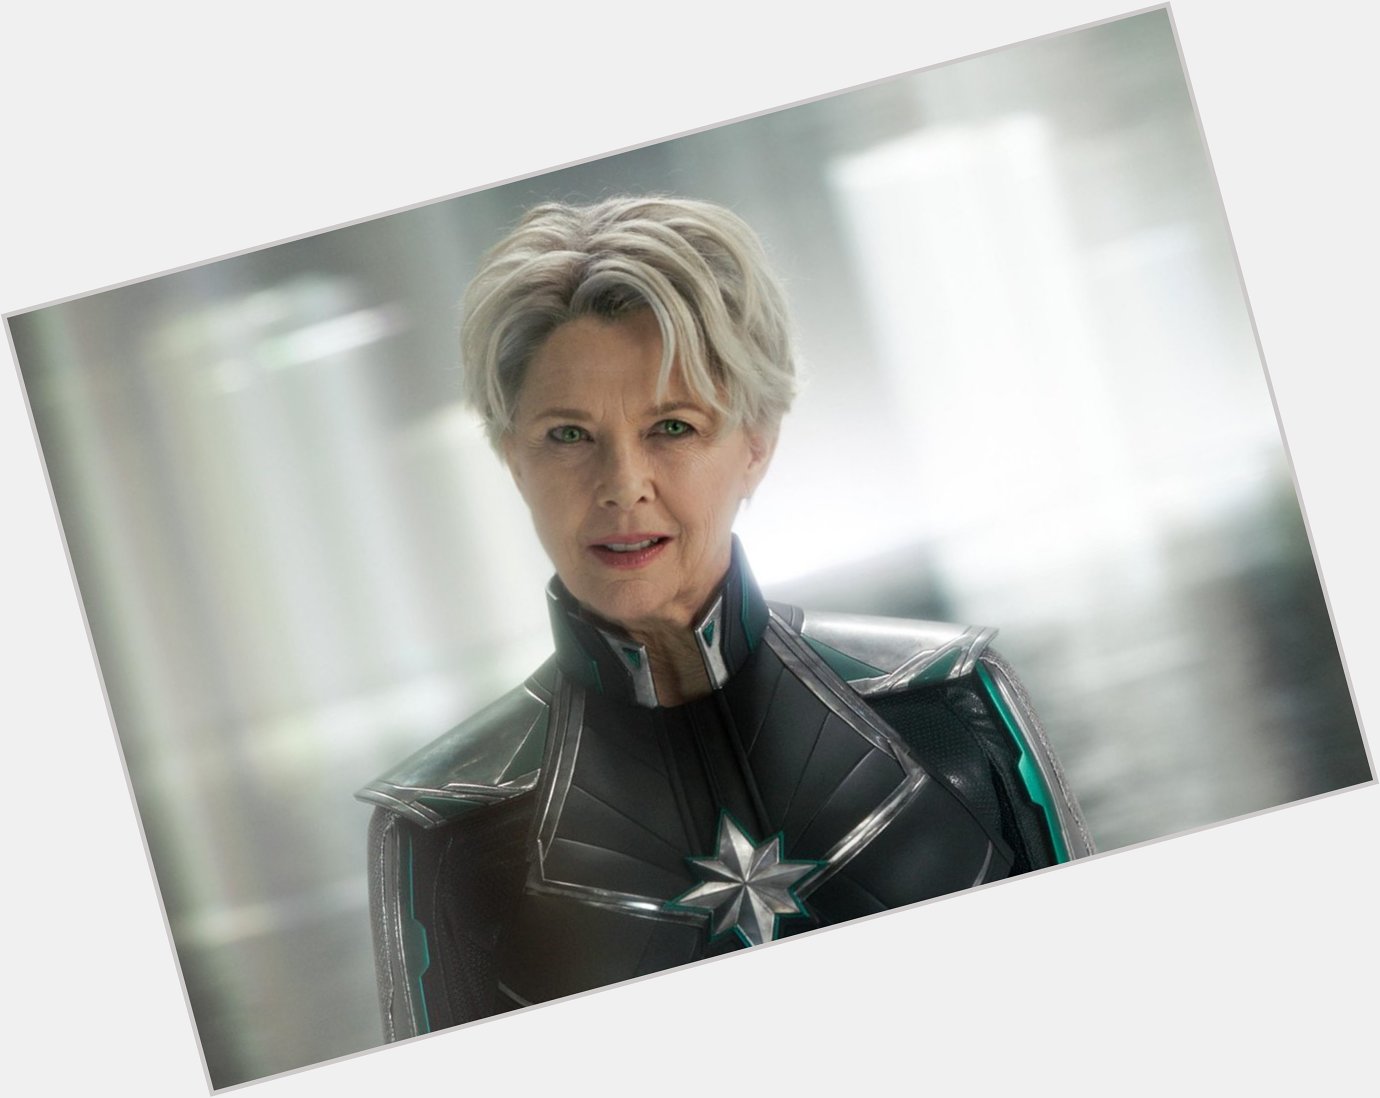 Today we wish a very Happy Birthday to Annette Bening MARVEL STUDIOS 2019 